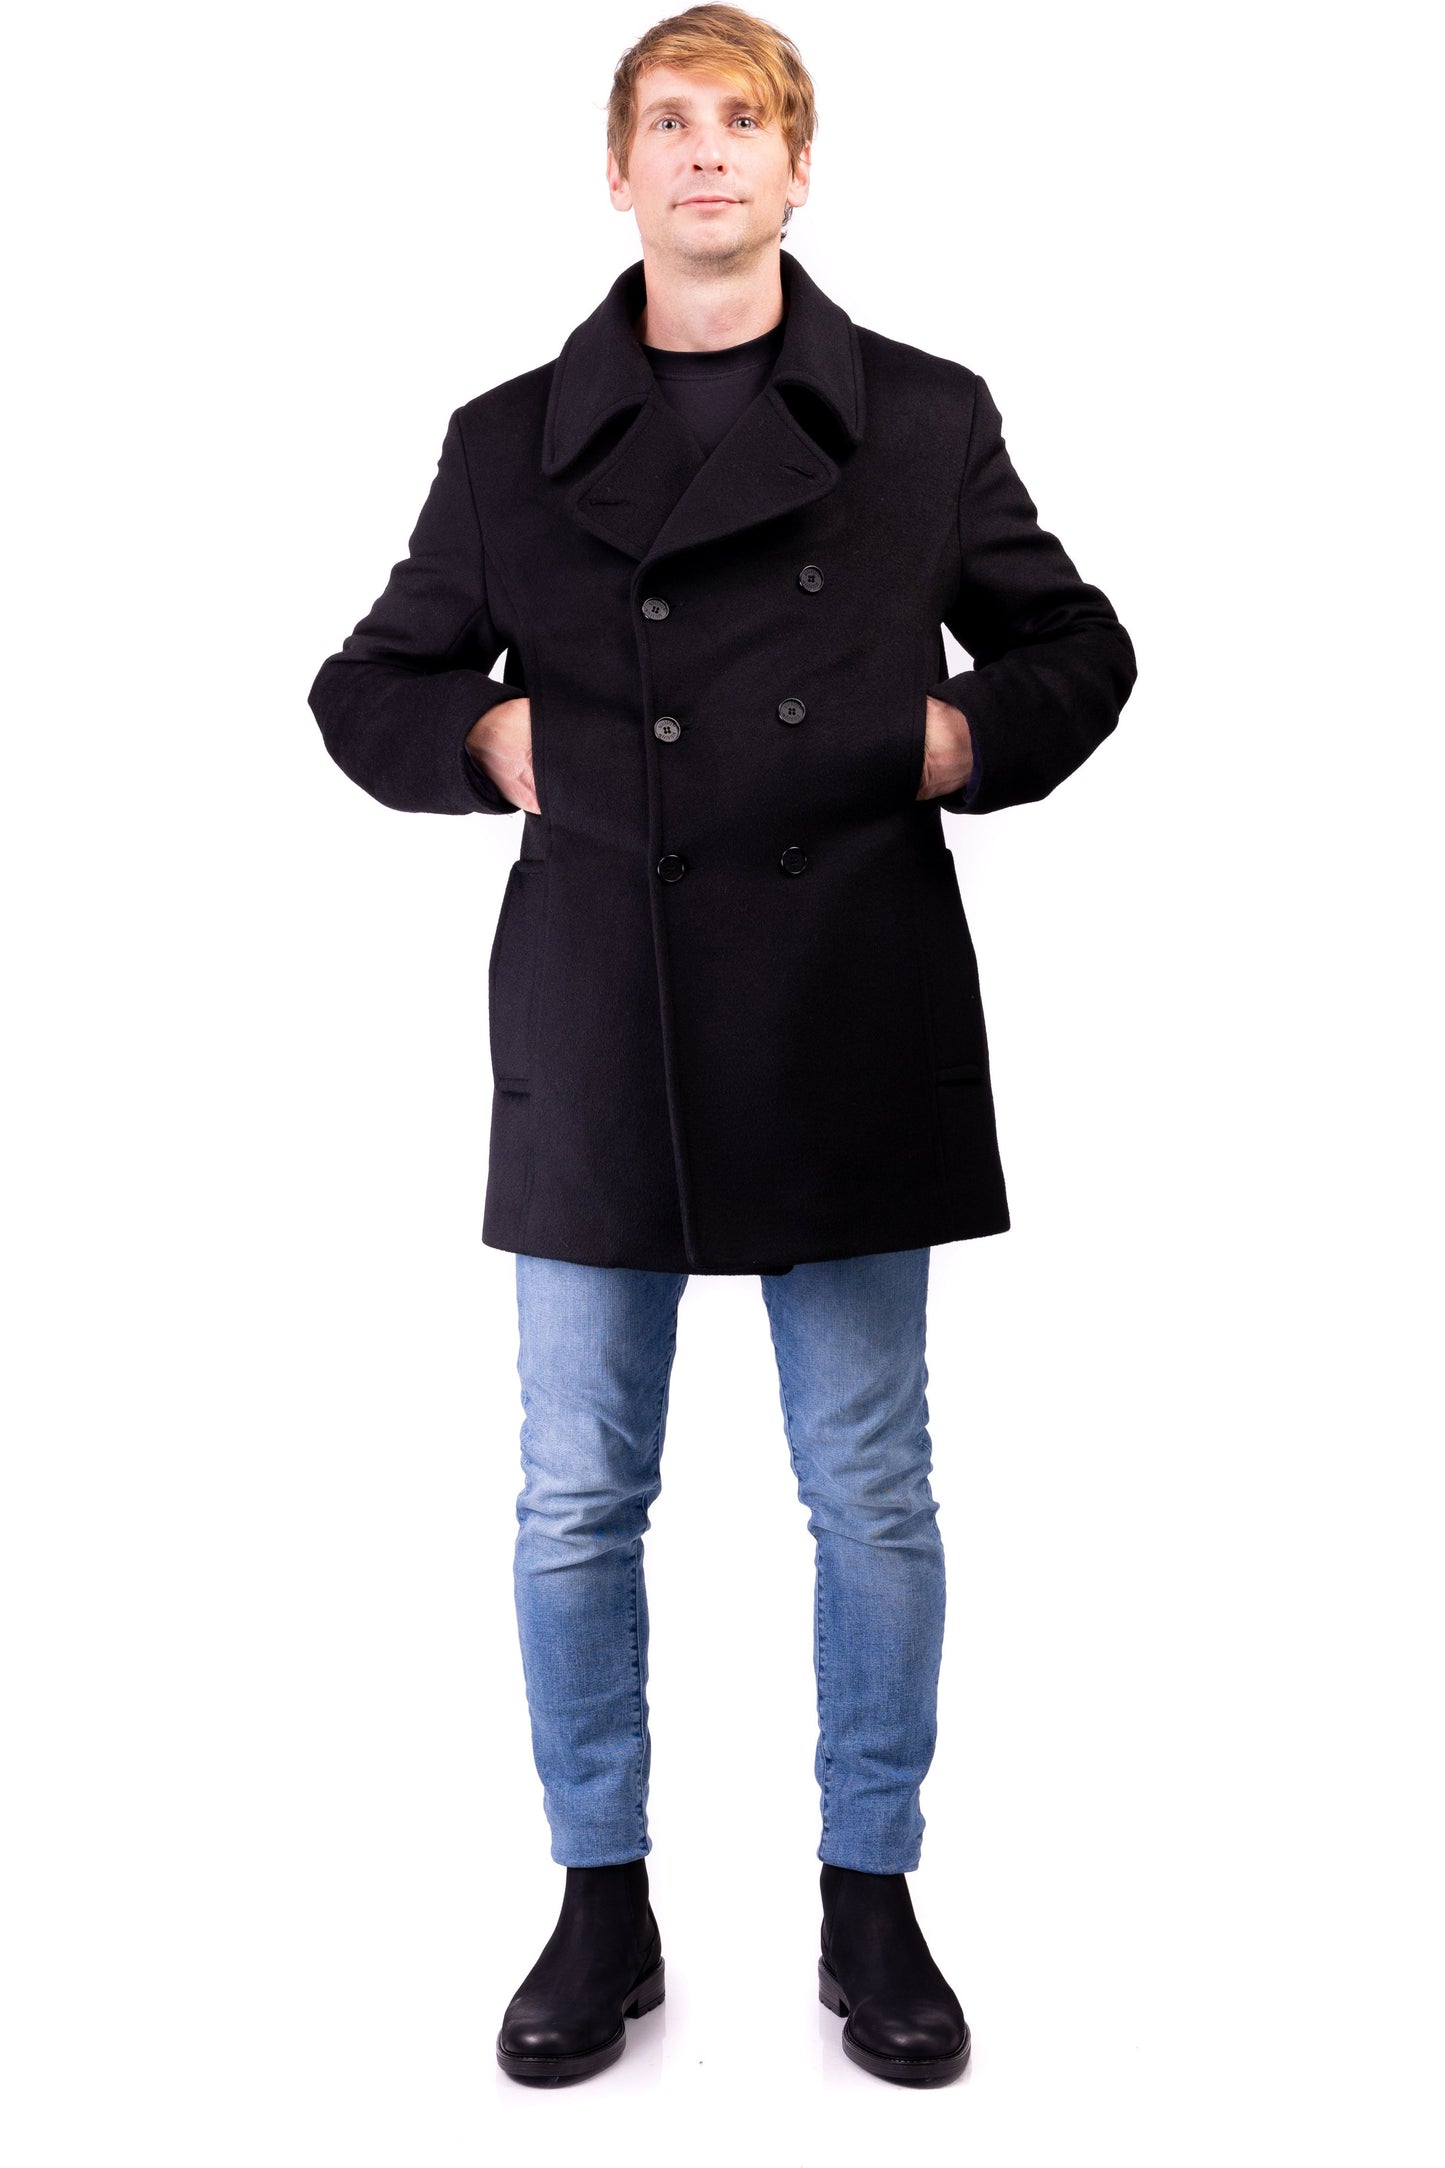 Desloups winter coat in pea coat style for men, double-breasted in 100% wool and lined